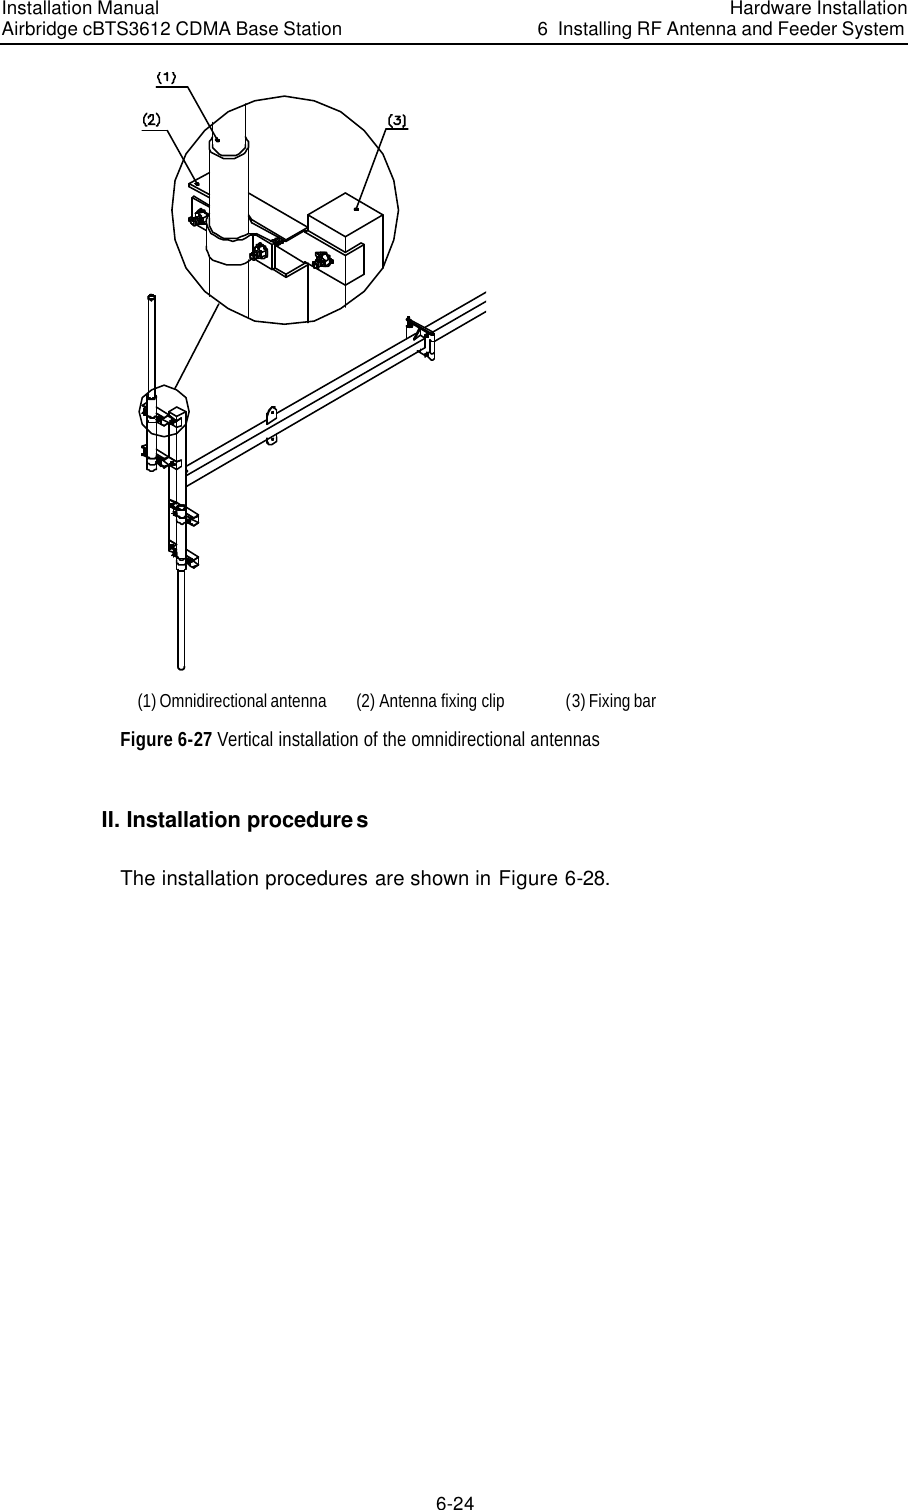 Installation Manual Airbridge cBTS3612 CDMA Base Station Hardware Installation6  Installing RF Antenna and Feeder System 6-24  (1) Omnidirectional antenna (2) Antenna fixing clip (3) Fixing bar Figure 6-27 Vertical installation of the omnidirectional antennas II. Installation procedures The installation procedures are shown in Figure 6-28. 